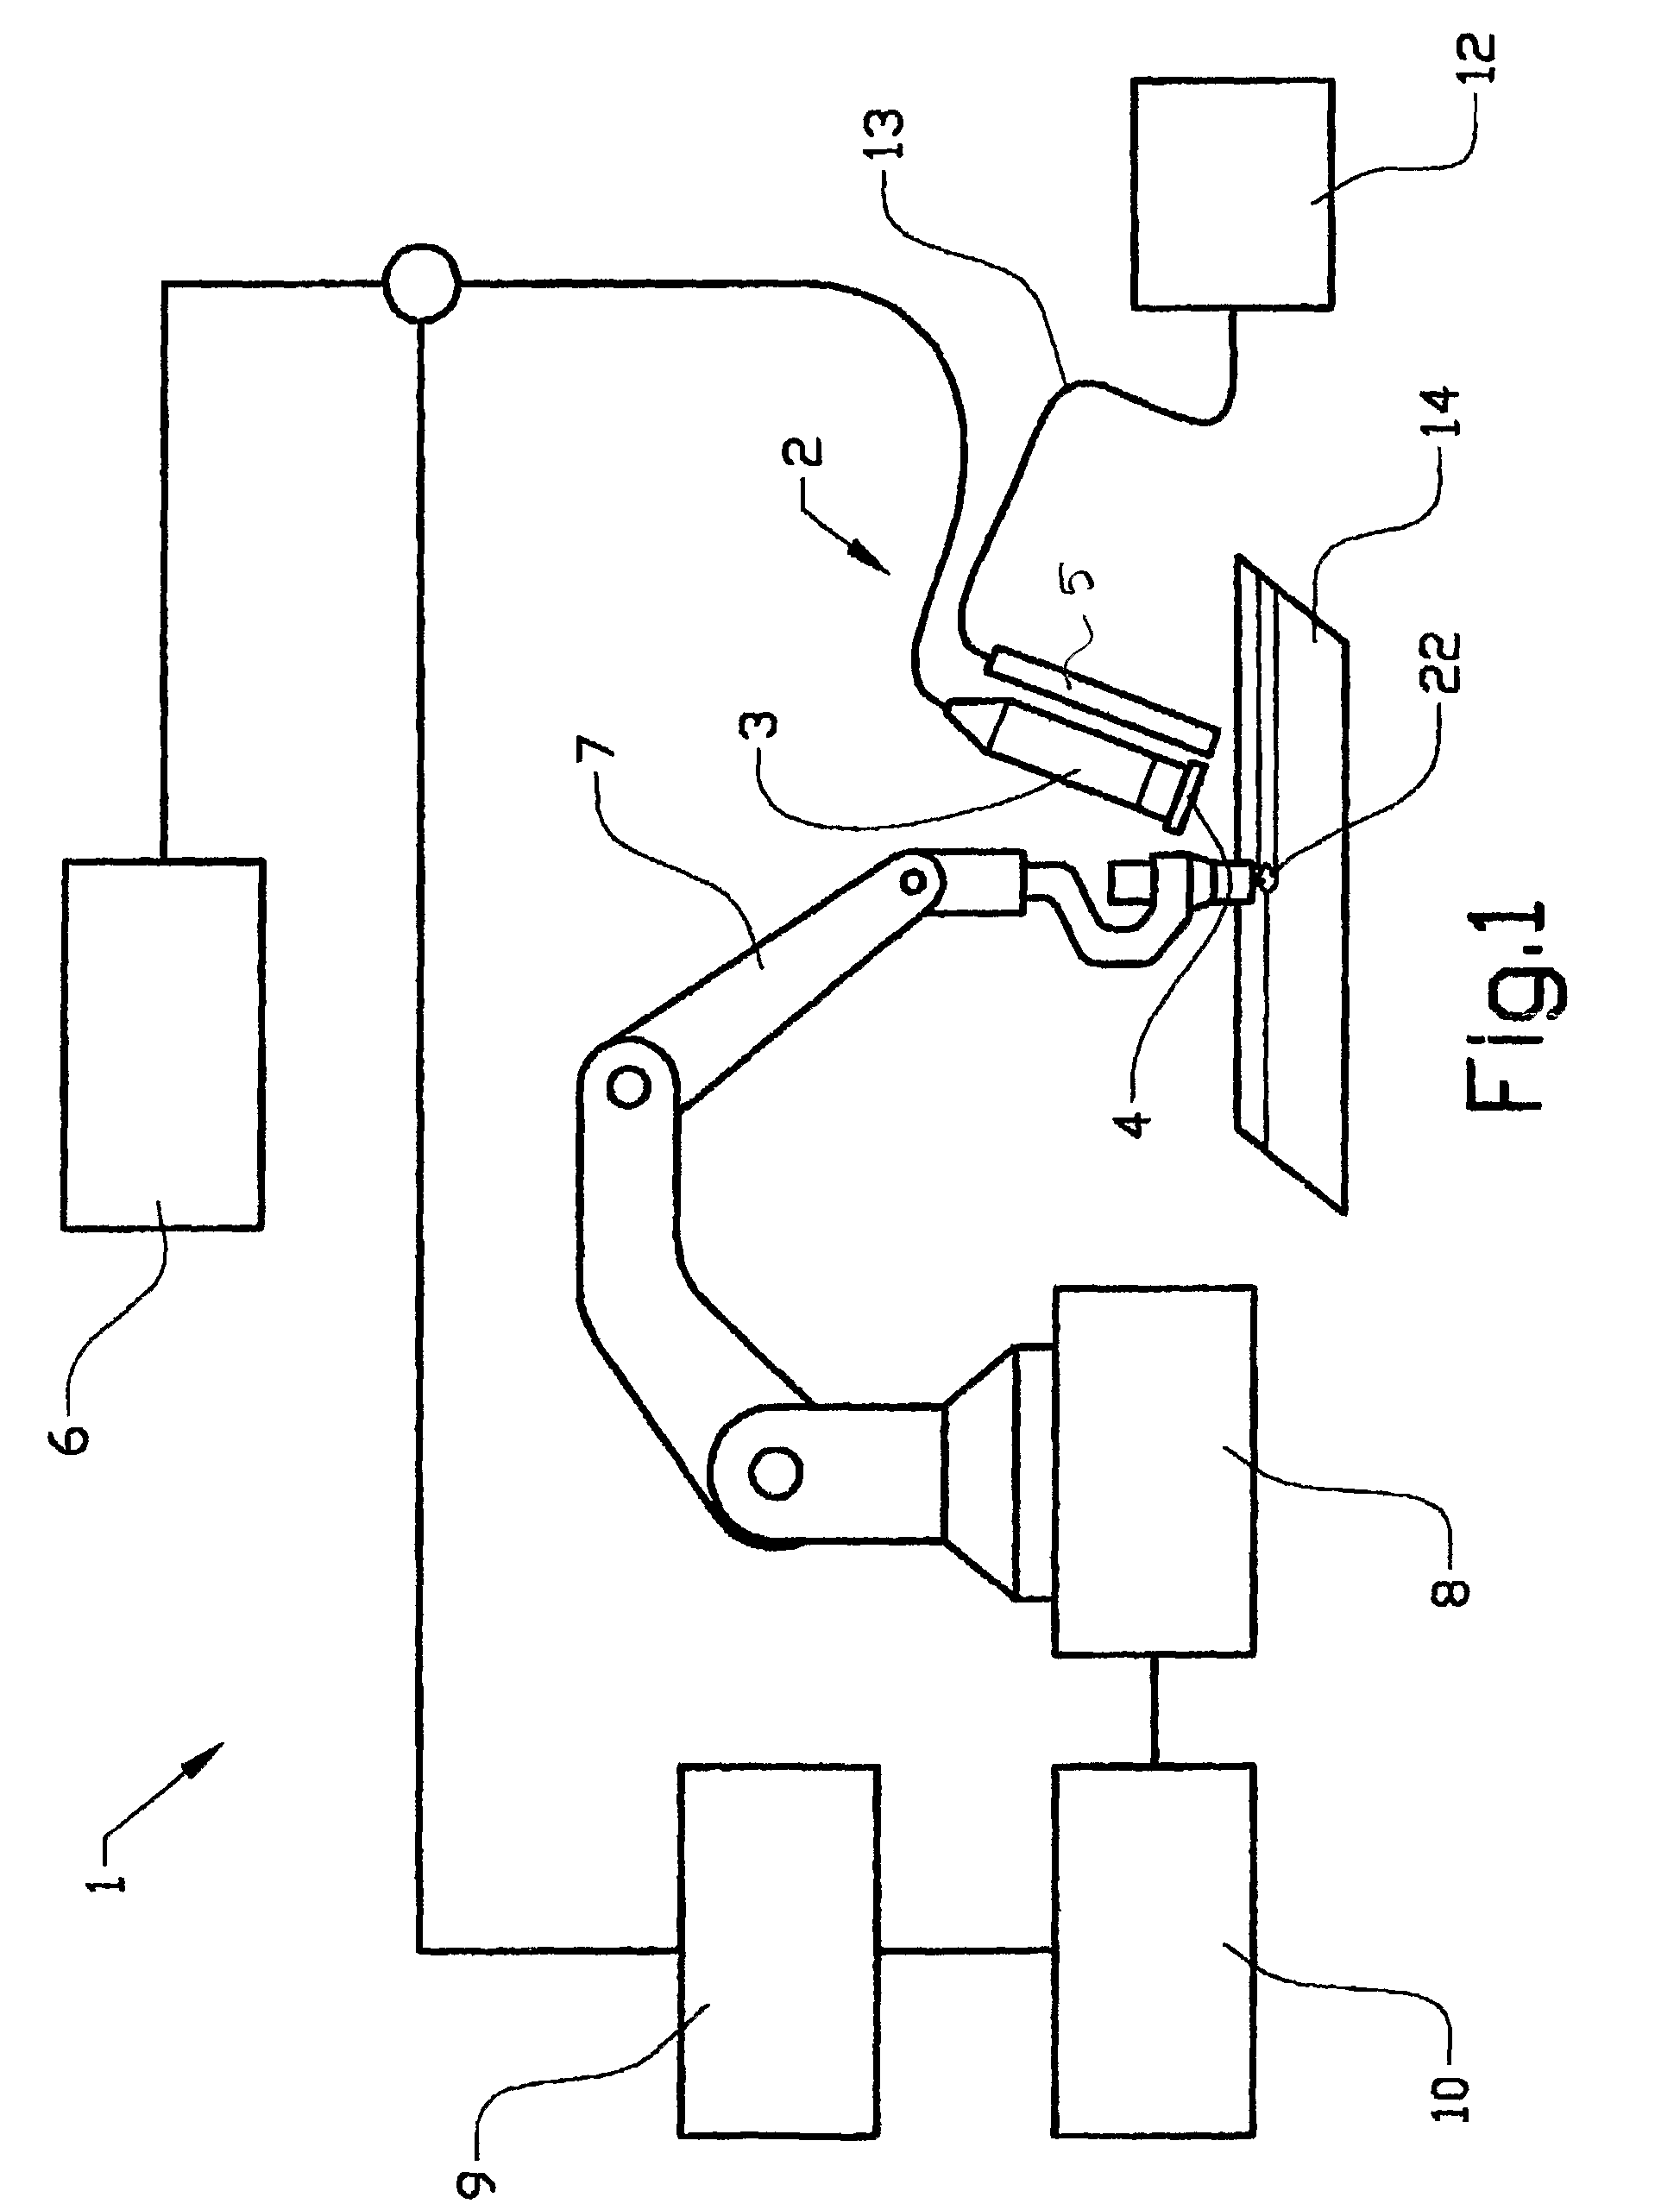 Device and method for monitoring a welding area and an arrangement and a method for controlling a welding operation